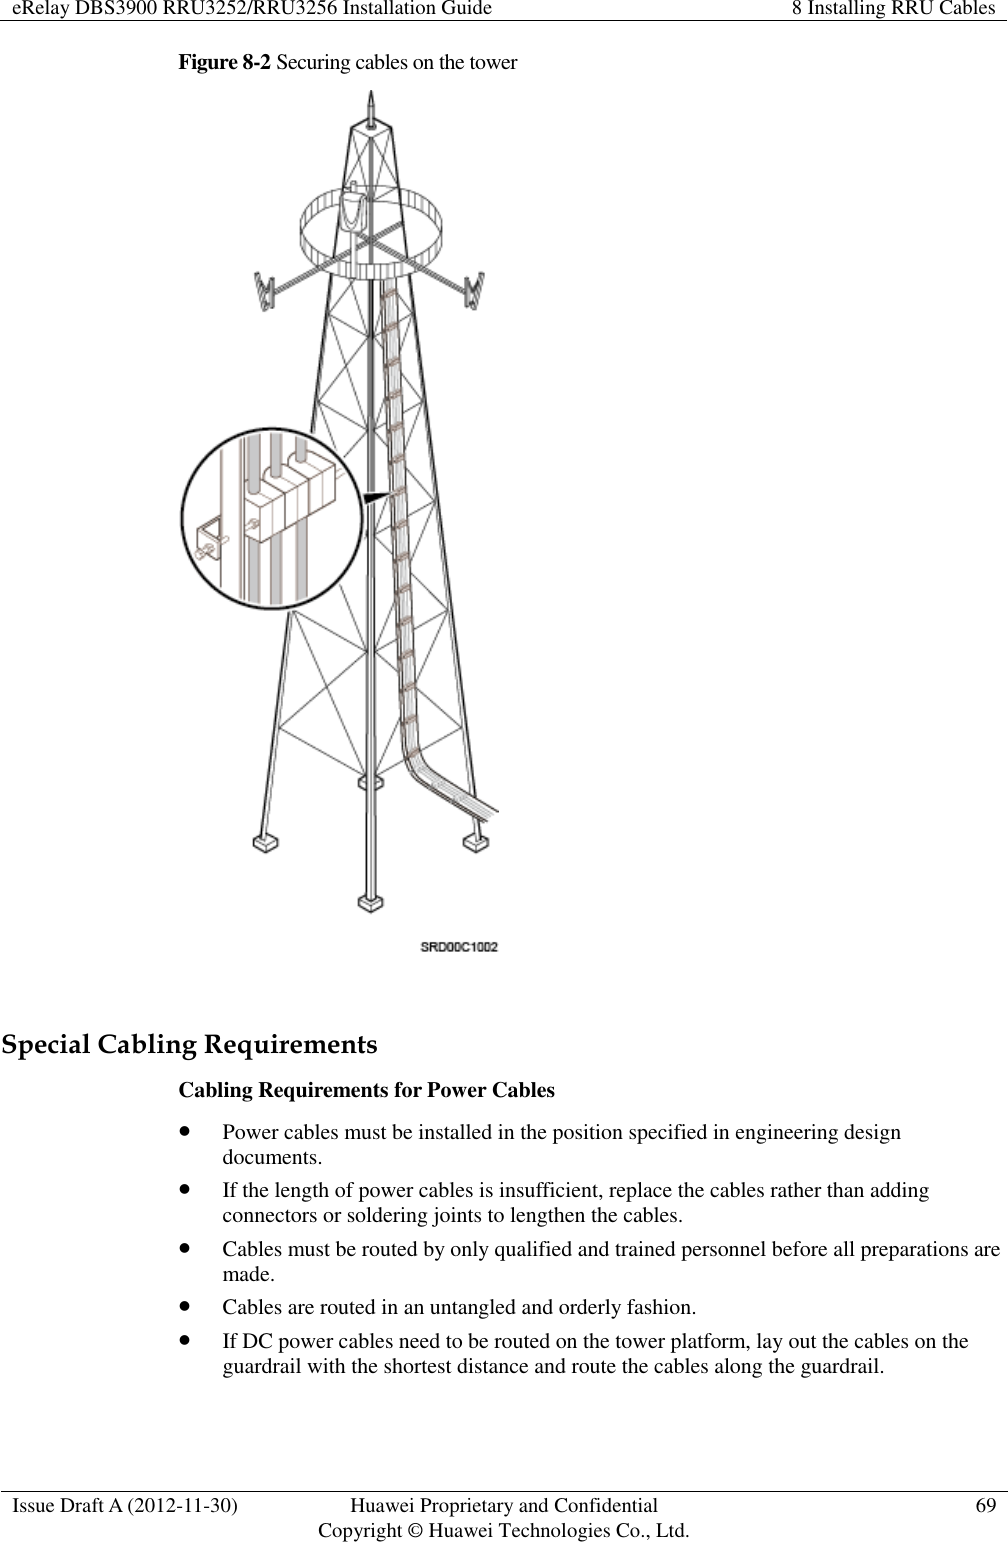 eRelay DBS3900 RRU3252/RRU3256 Installation Guide 8 Installing RRU Cables  Issue Draft A (2012-11-30) Huawei Proprietary and Confidential                                     Copyright © Huawei Technologies Co., Ltd. 69  Figure 8-2 Securing cables on the tower   Special Cabling Requirements Cabling Requirements for Power Cables  Power cables must be installed in the position specified in engineering design documents.  If the length of power cables is insufficient, replace the cables rather than adding connectors or soldering joints to lengthen the cables.  Cables must be routed by only qualified and trained personnel before all preparations are made.  Cables are routed in an untangled and orderly fashion.  If DC power cables need to be routed on the tower platform, lay out the cables on the guardrail with the shortest distance and route the cables along the guardrail. 